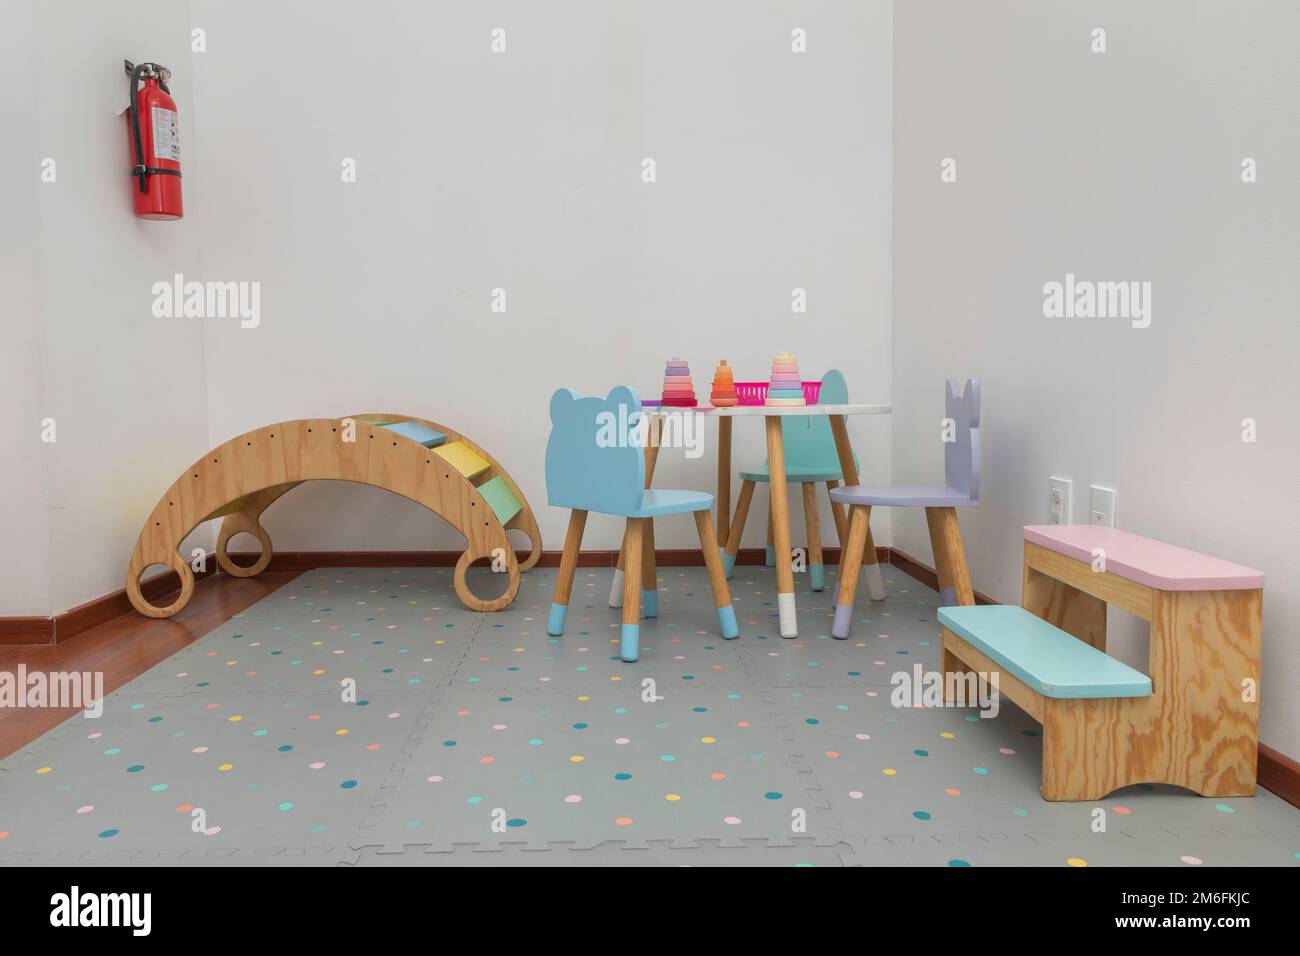 Children's play area in a pediatric office, with tables, chairs and games for children. Stock Photo